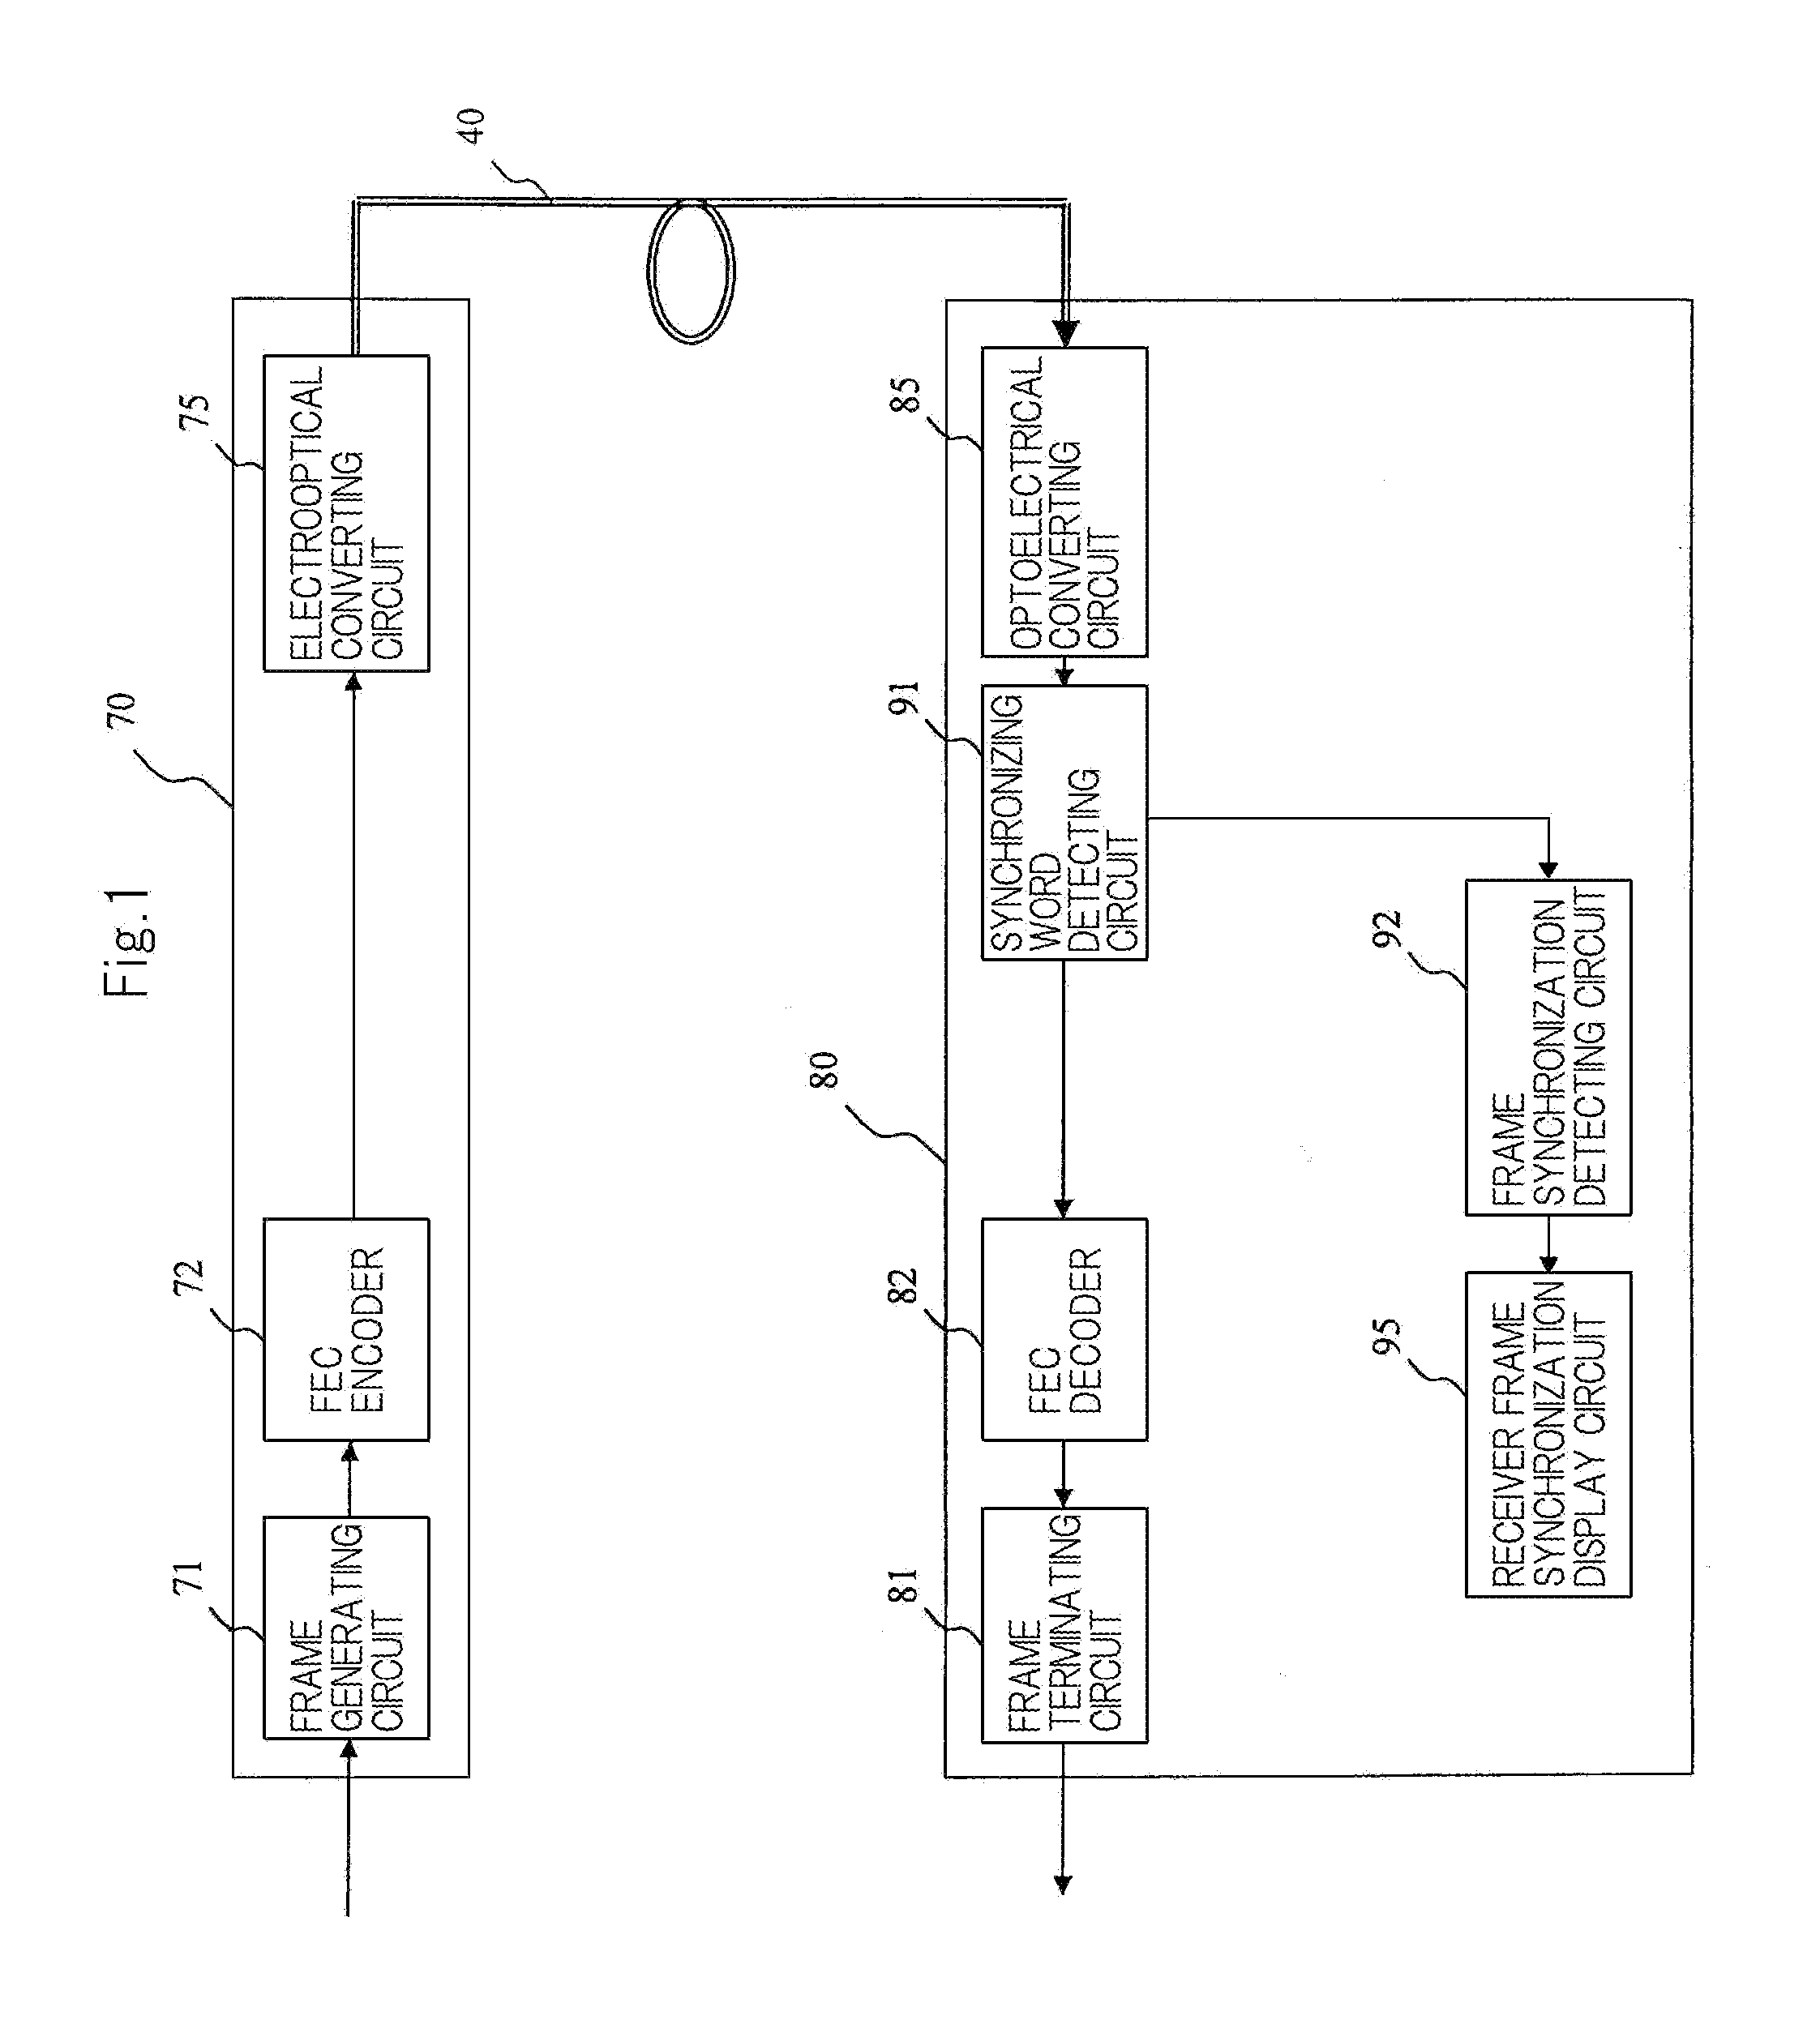 Optical transceiving system with frame synchronization and optical receiving apparatus